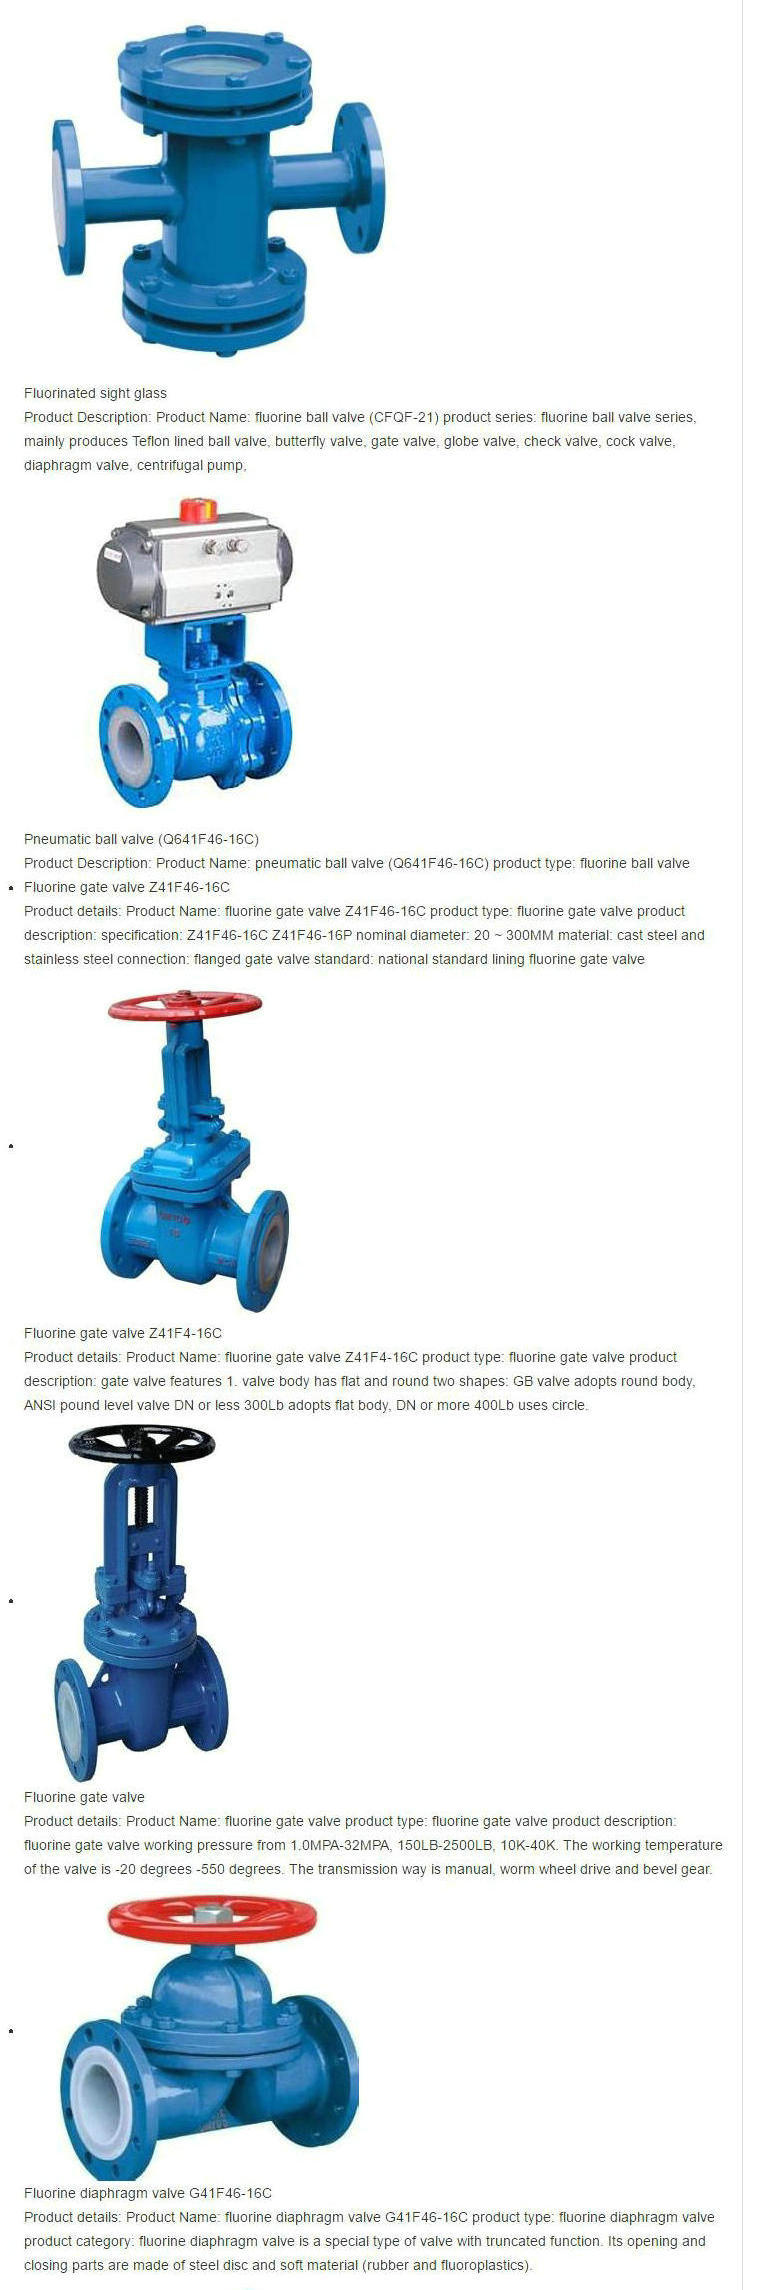 PTFE / F4 Lined Butterfly Valve (Ball Valves CS/F46, D371F4-16C, Pneumatic Q641F46-16C) for Chemical Acid Tank